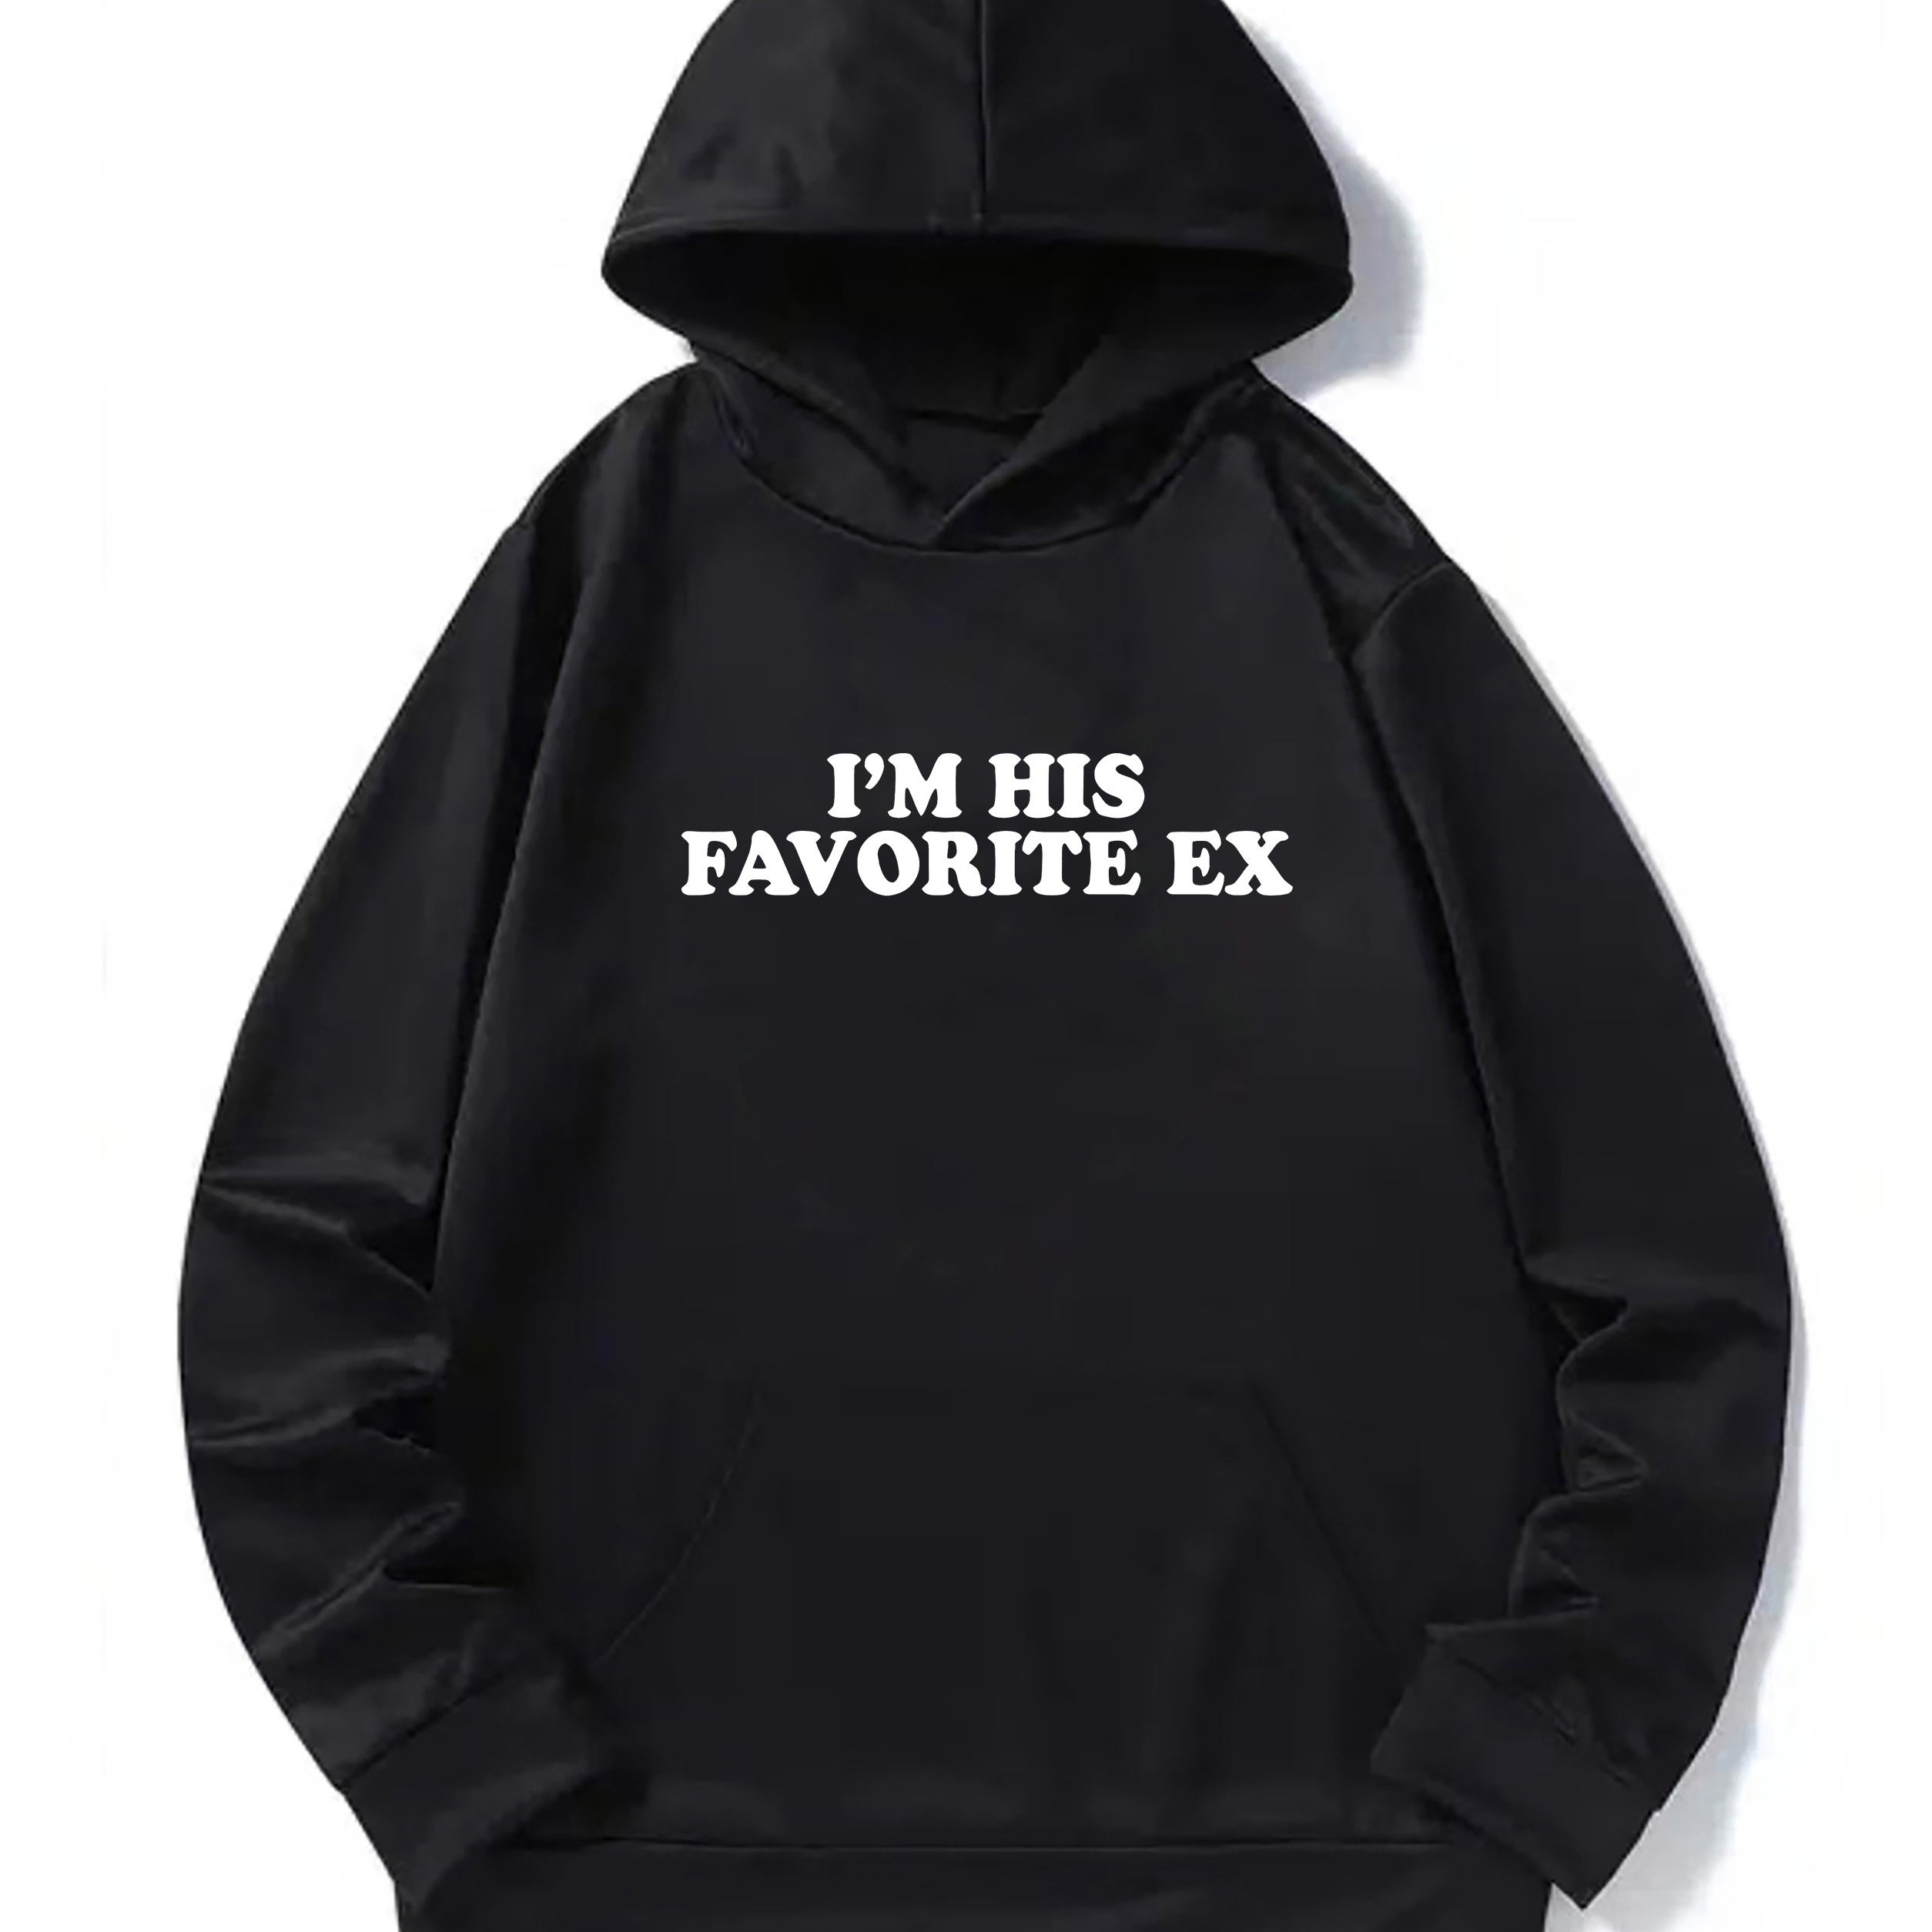 

I Am His Favorite Ex Print Men's Pullover Round Neck Hoodies With Kangaroo Pocket & Long Sleeve Hooded Sweatshirt Loose Casual Top For Autumn Winter Men's Clothing As Gifts